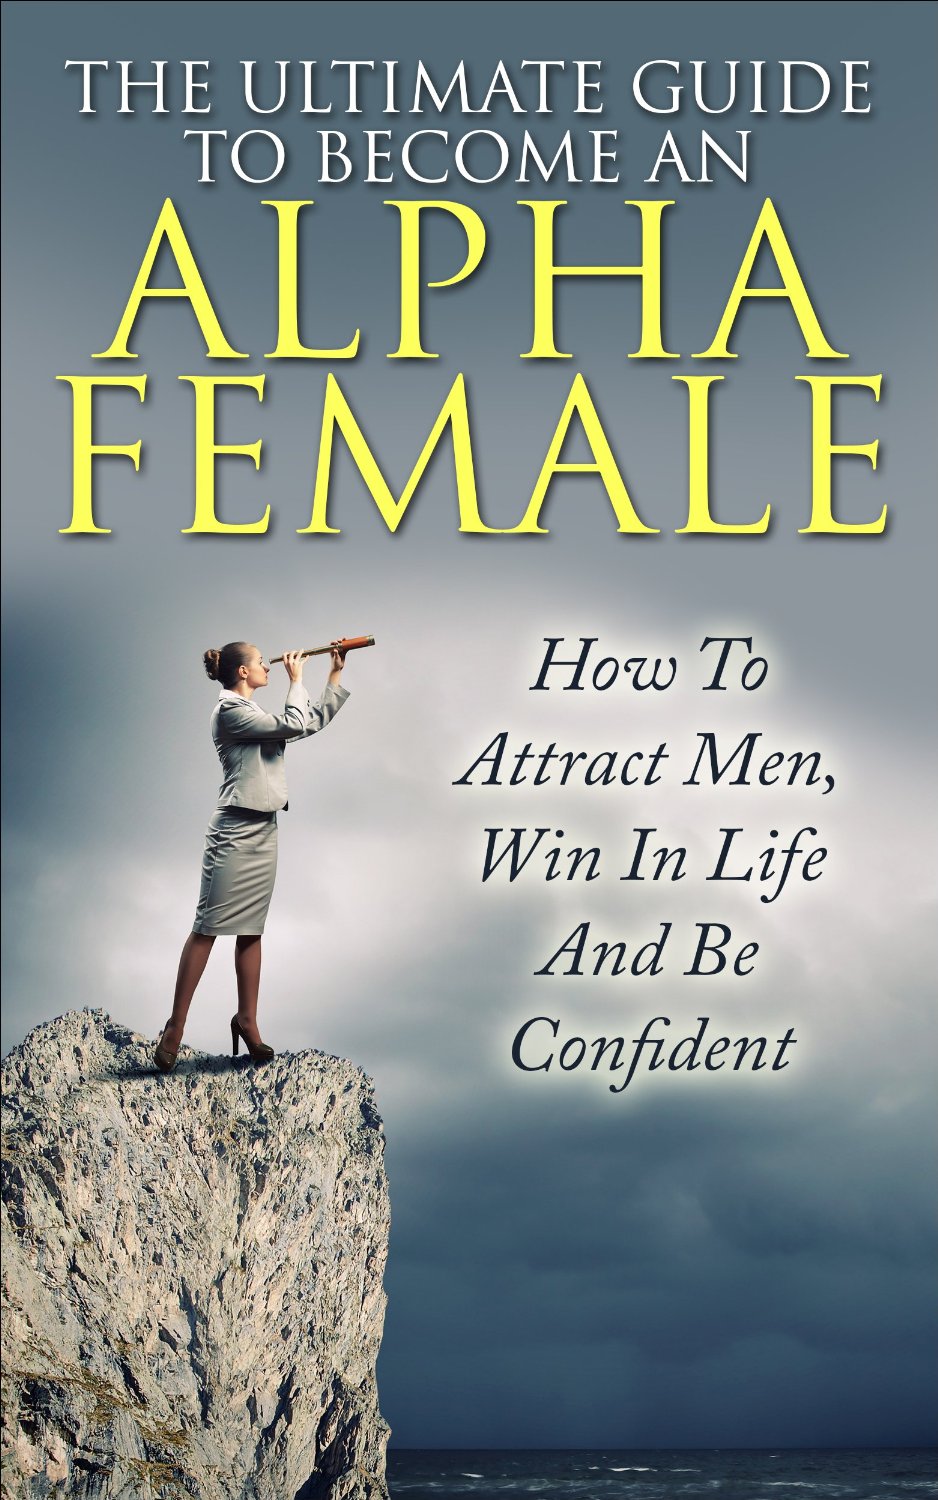 FREE: The Ultimate Guide To Become An Alpha Female: How To Attract Men, Win In Life And Be Confident by Allison Lewis